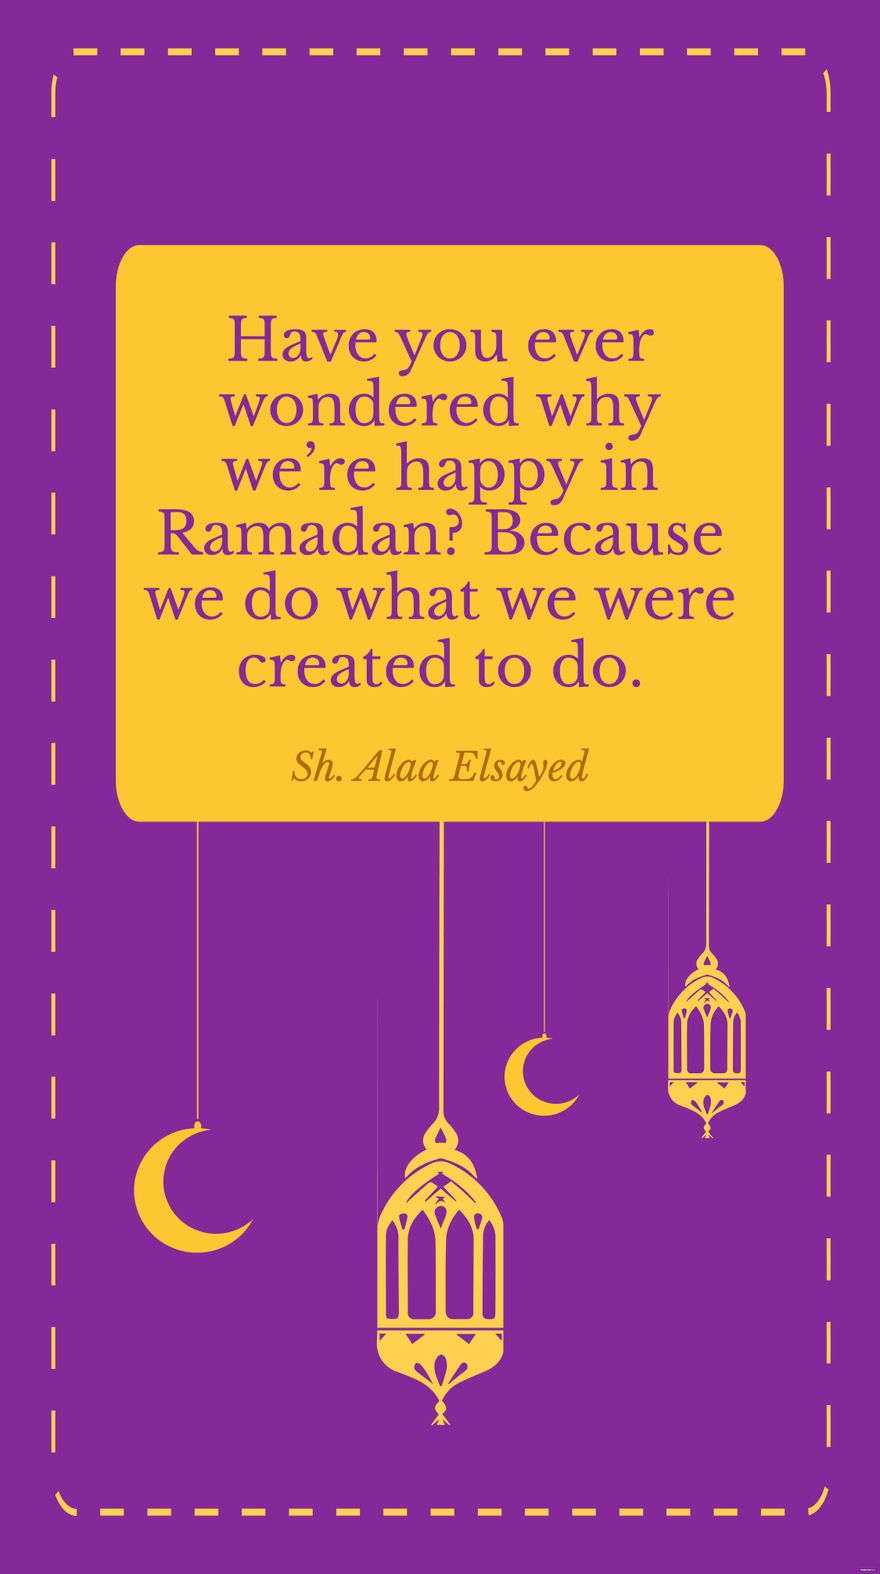 Sh. Alaa Elsayed - Have you ever wondered why we’re happy in Ramadan? Because we do what we were created to do.